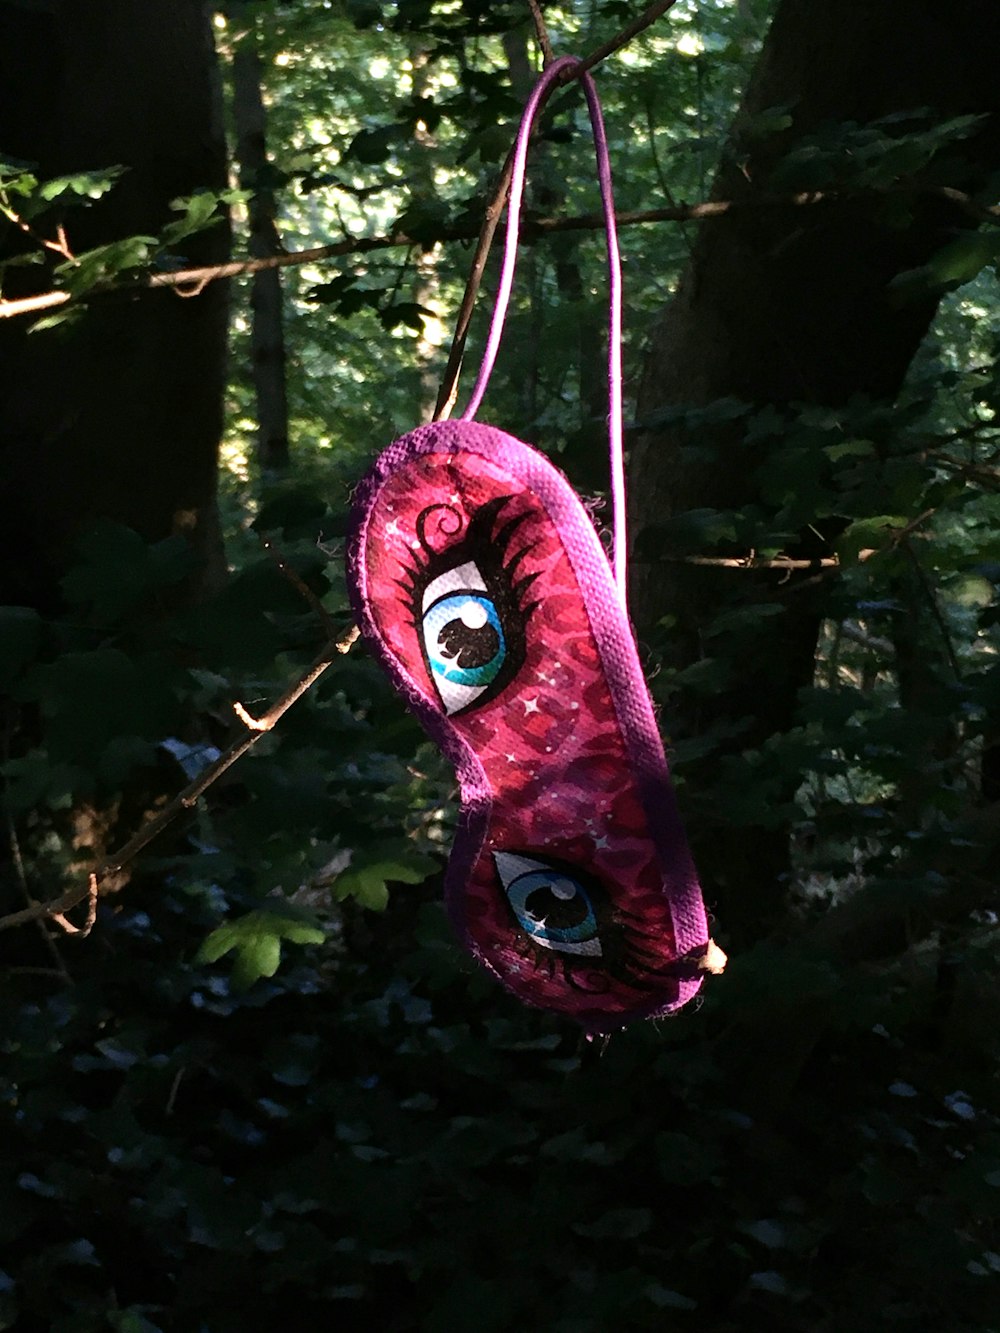 a stuffed animal hanging from a tree in a forest